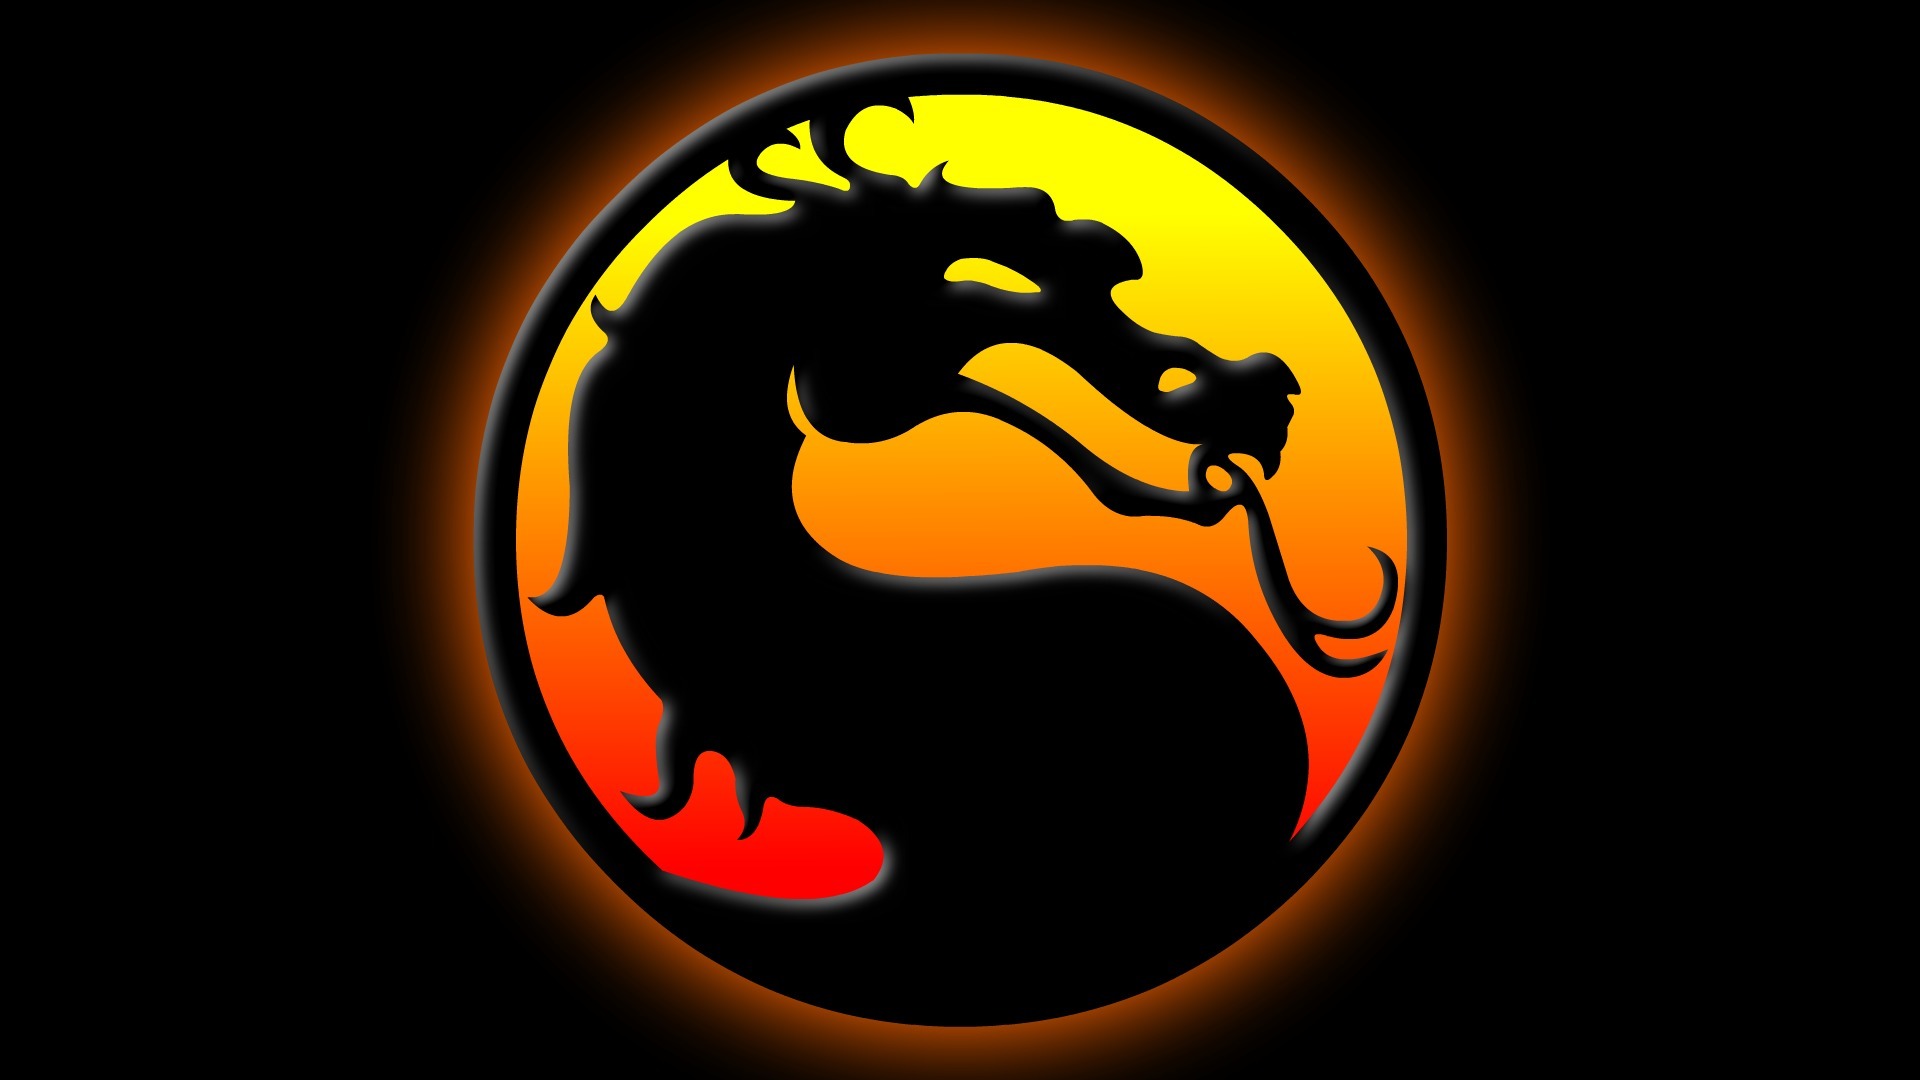 Stream Download Ultimate Mortal Kombat Trilogy For Android Apk